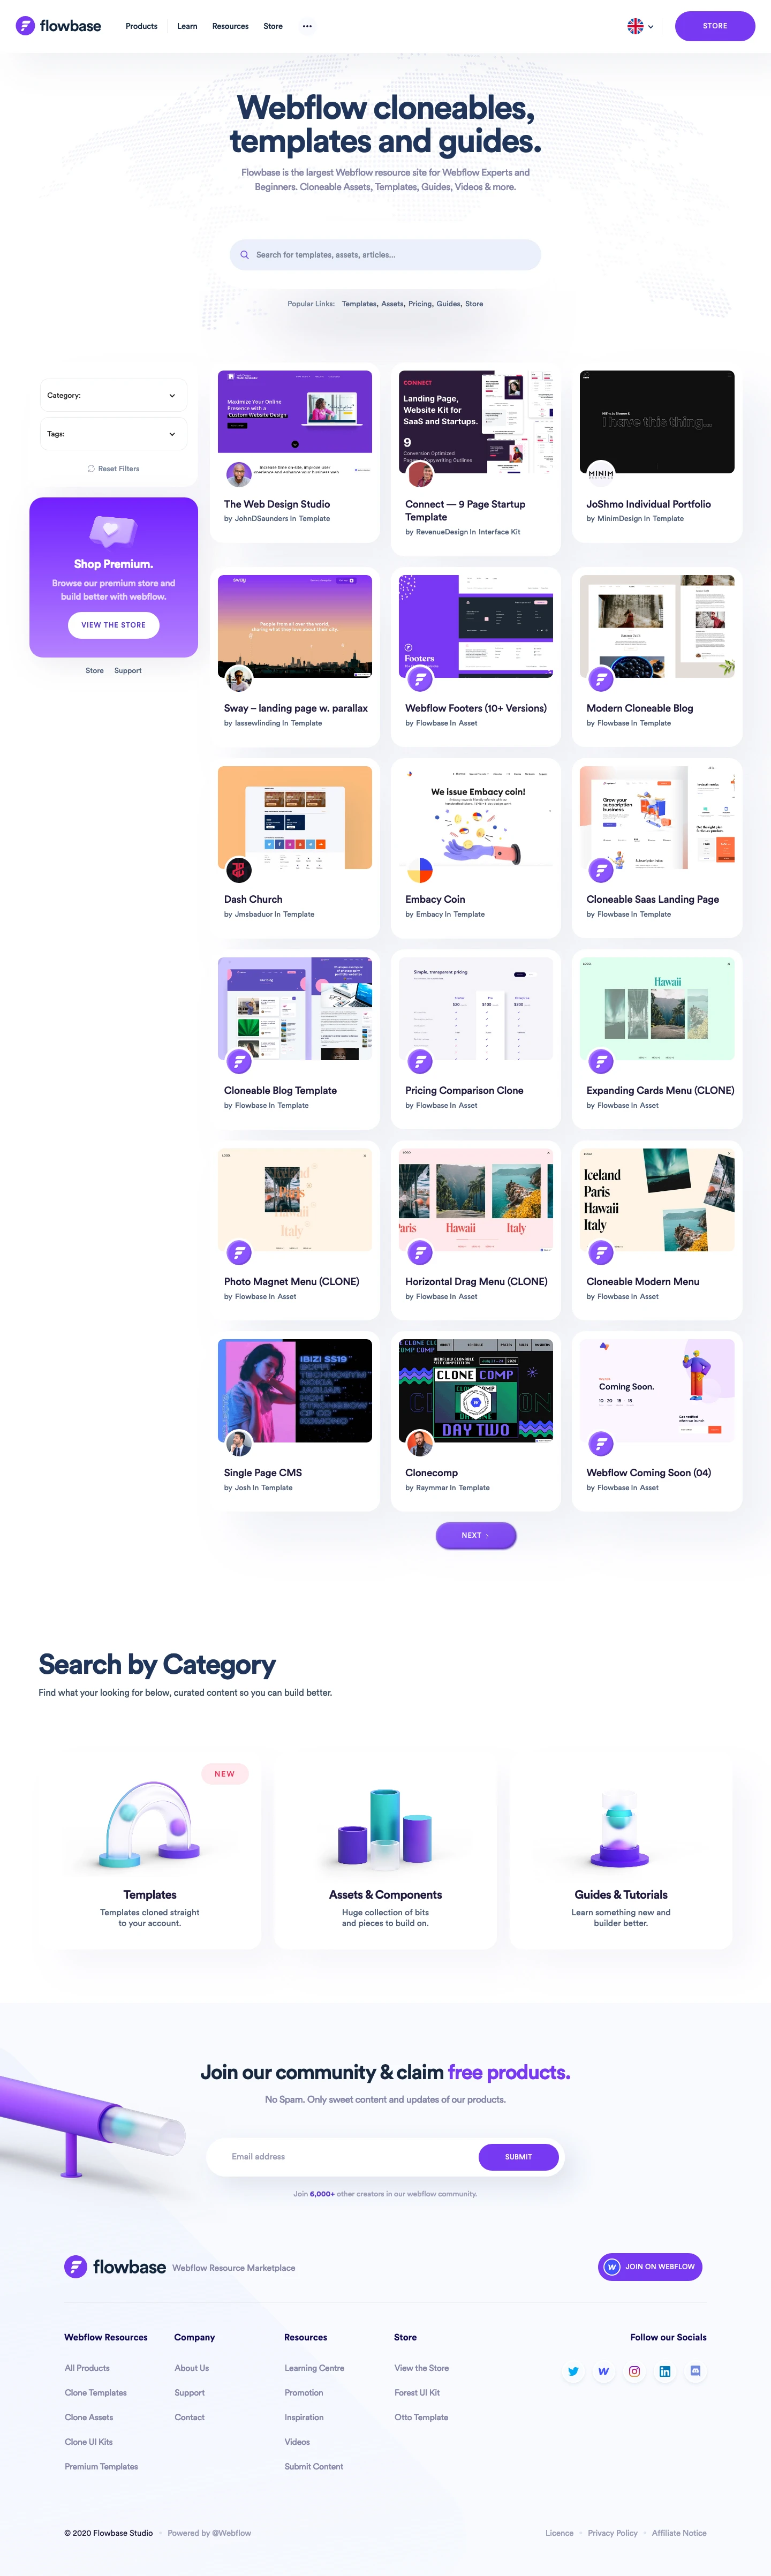 Flowbase Landing Page Example: Discover our collection of free cloneable Webflow templates, themes, assets and guides. Easily search and sort through the showcase, and build better websites faster.